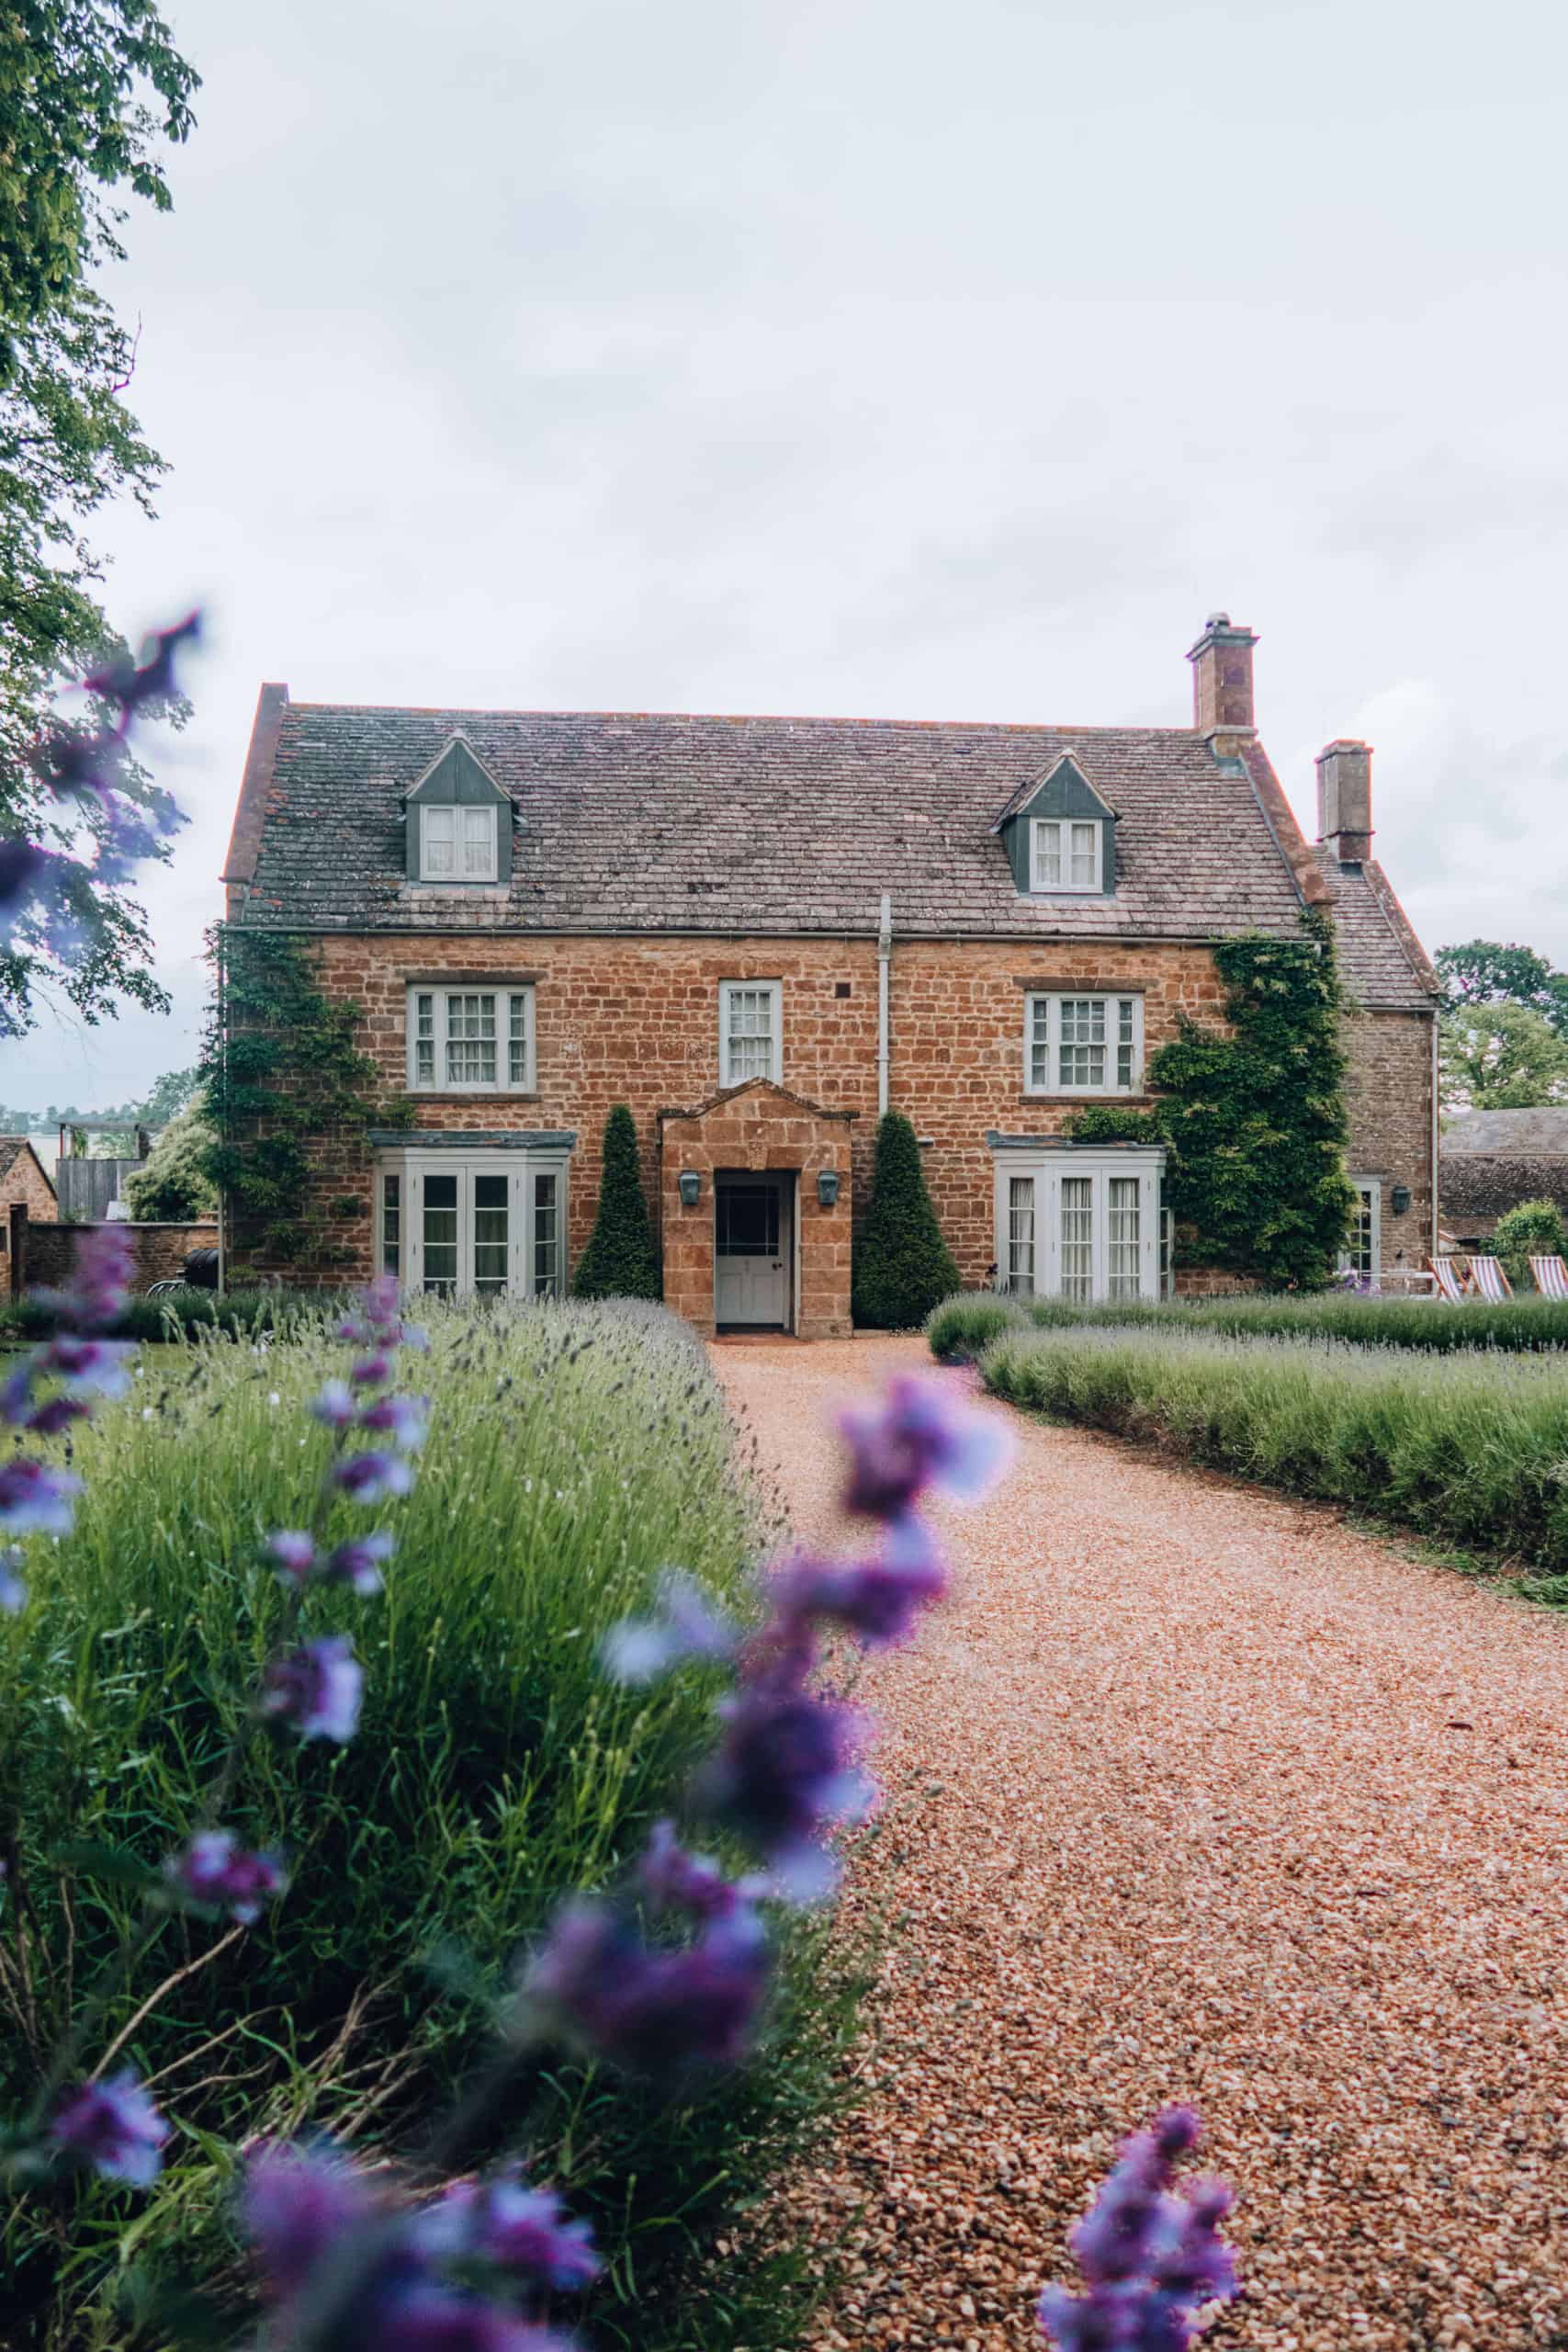 Cottage at Soho Farmhouse in the English Countryside | The Cotswolds in 20 Photos